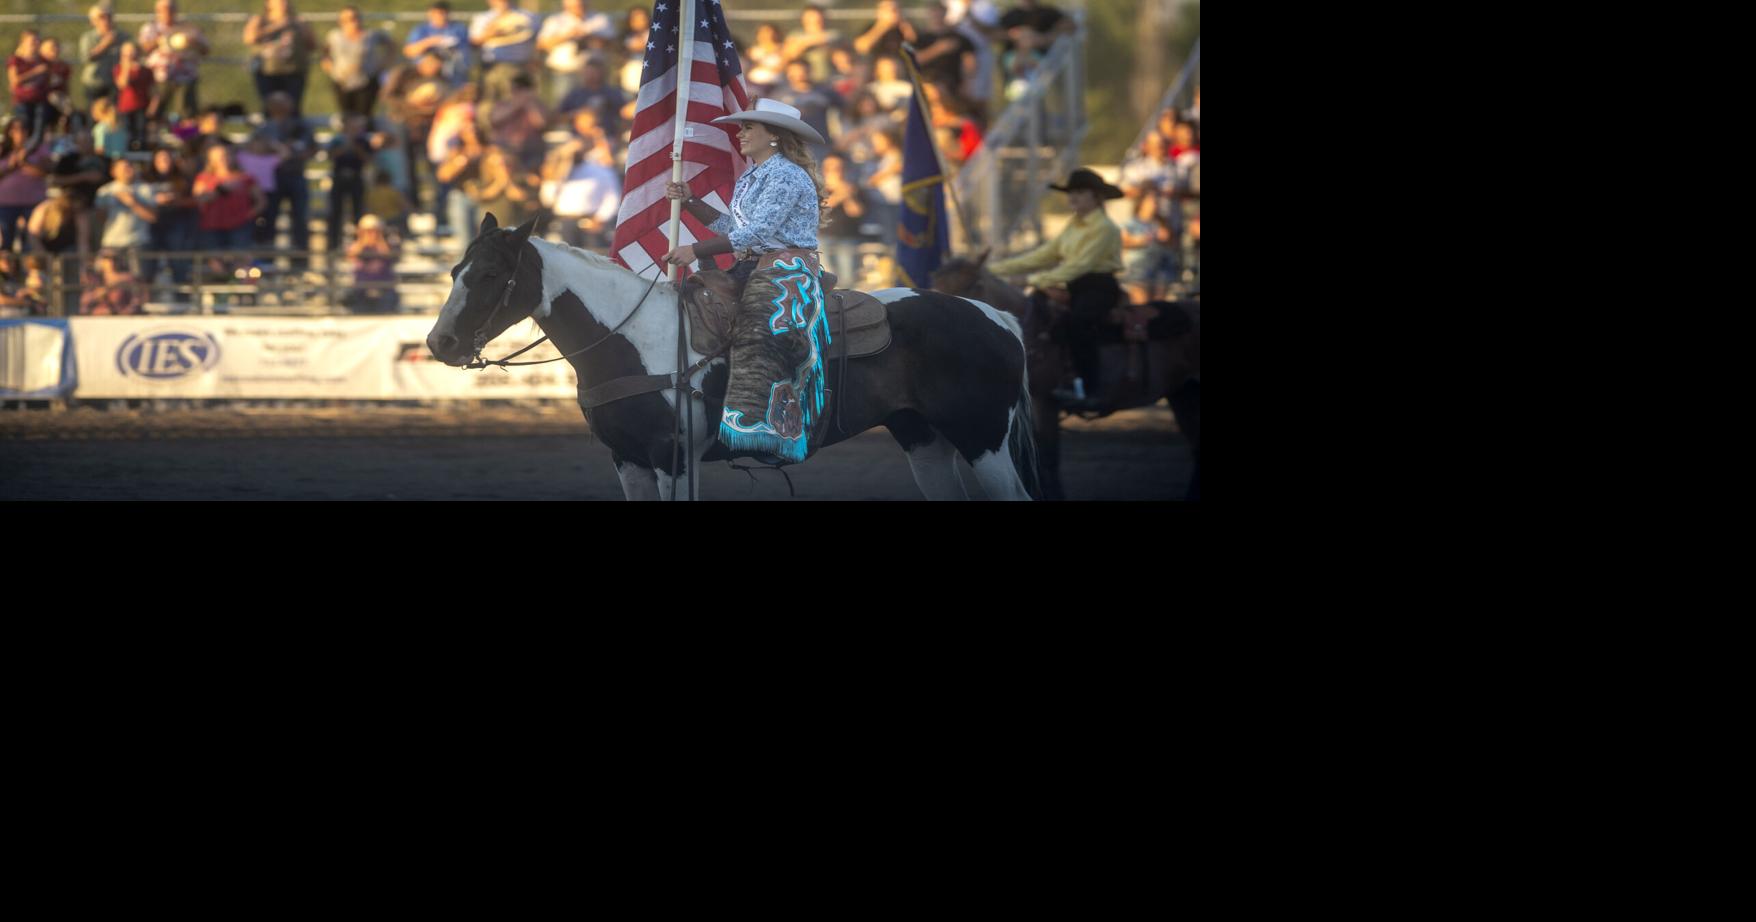 PHOTOS/VIDEO Magic Valley Stampede PRCA Rodeo